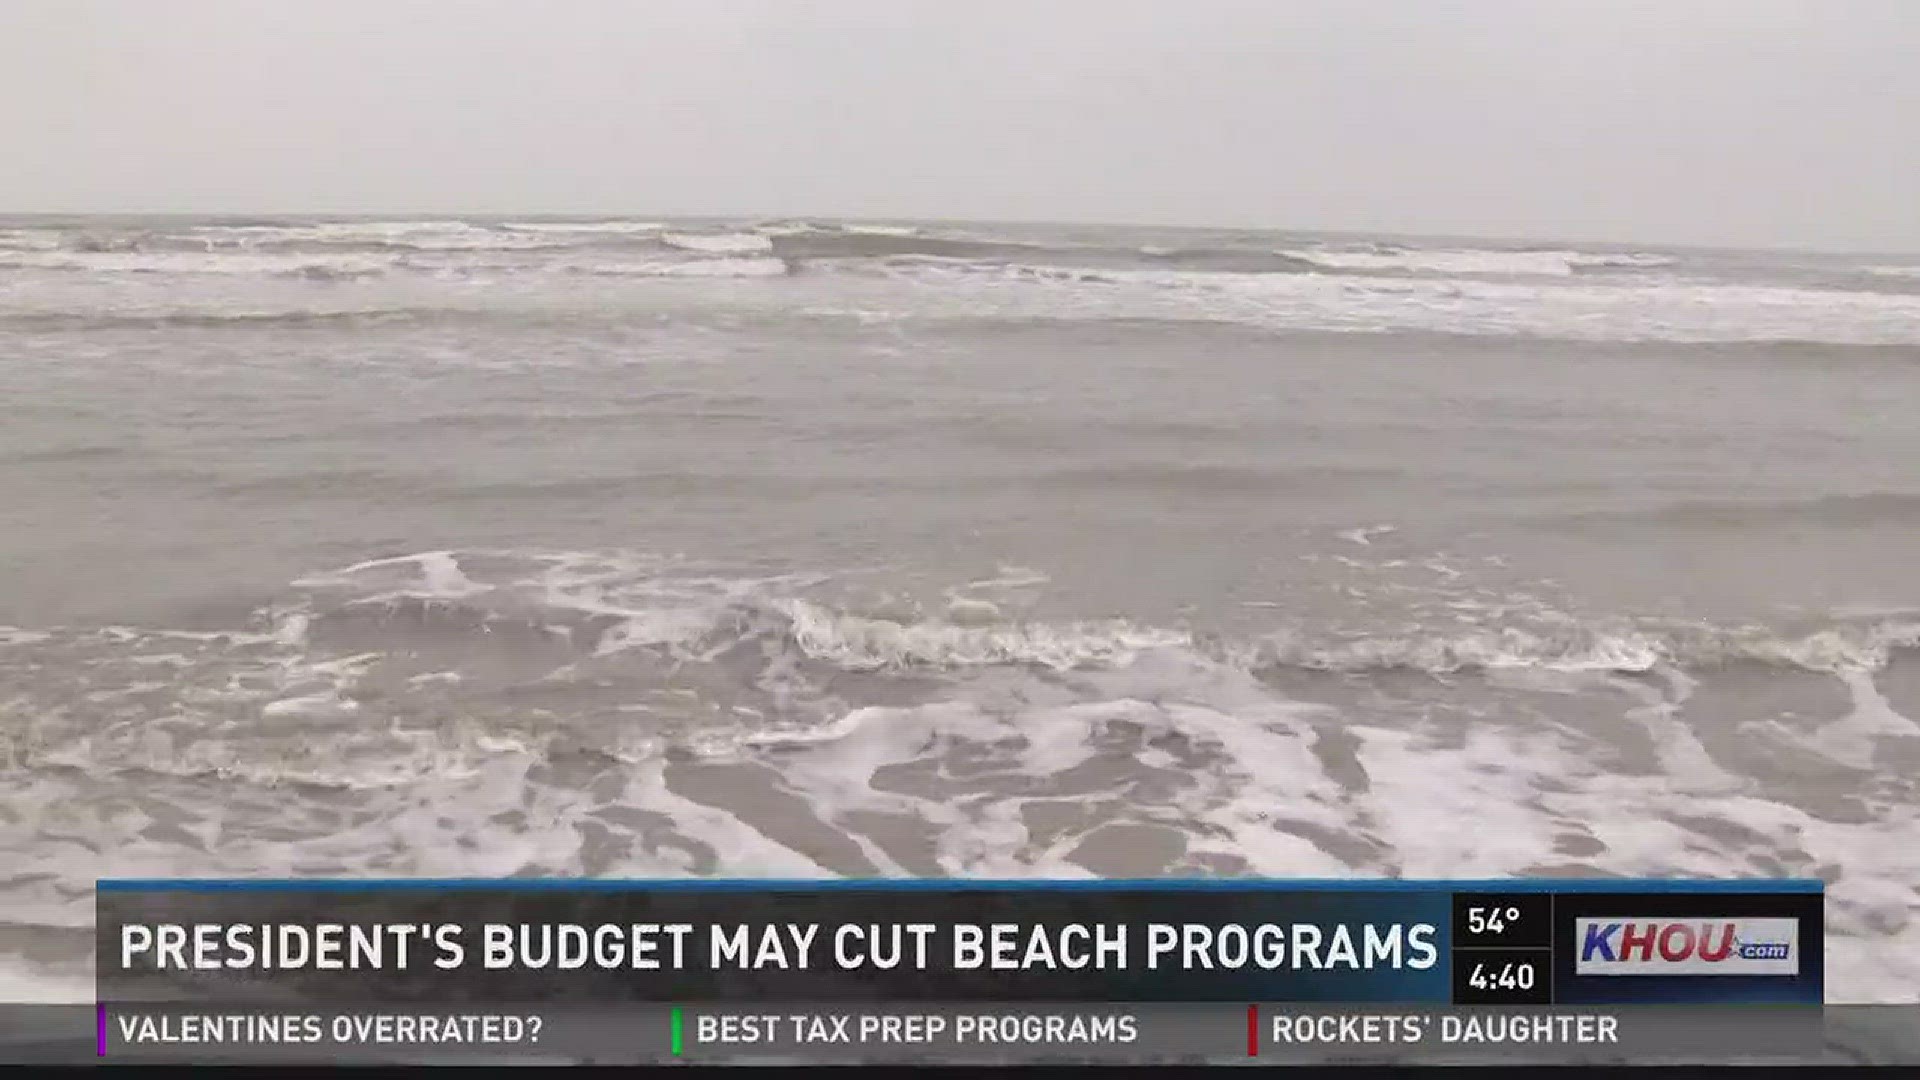 President Trump's proposed budget could cut beach programs in Galveston.